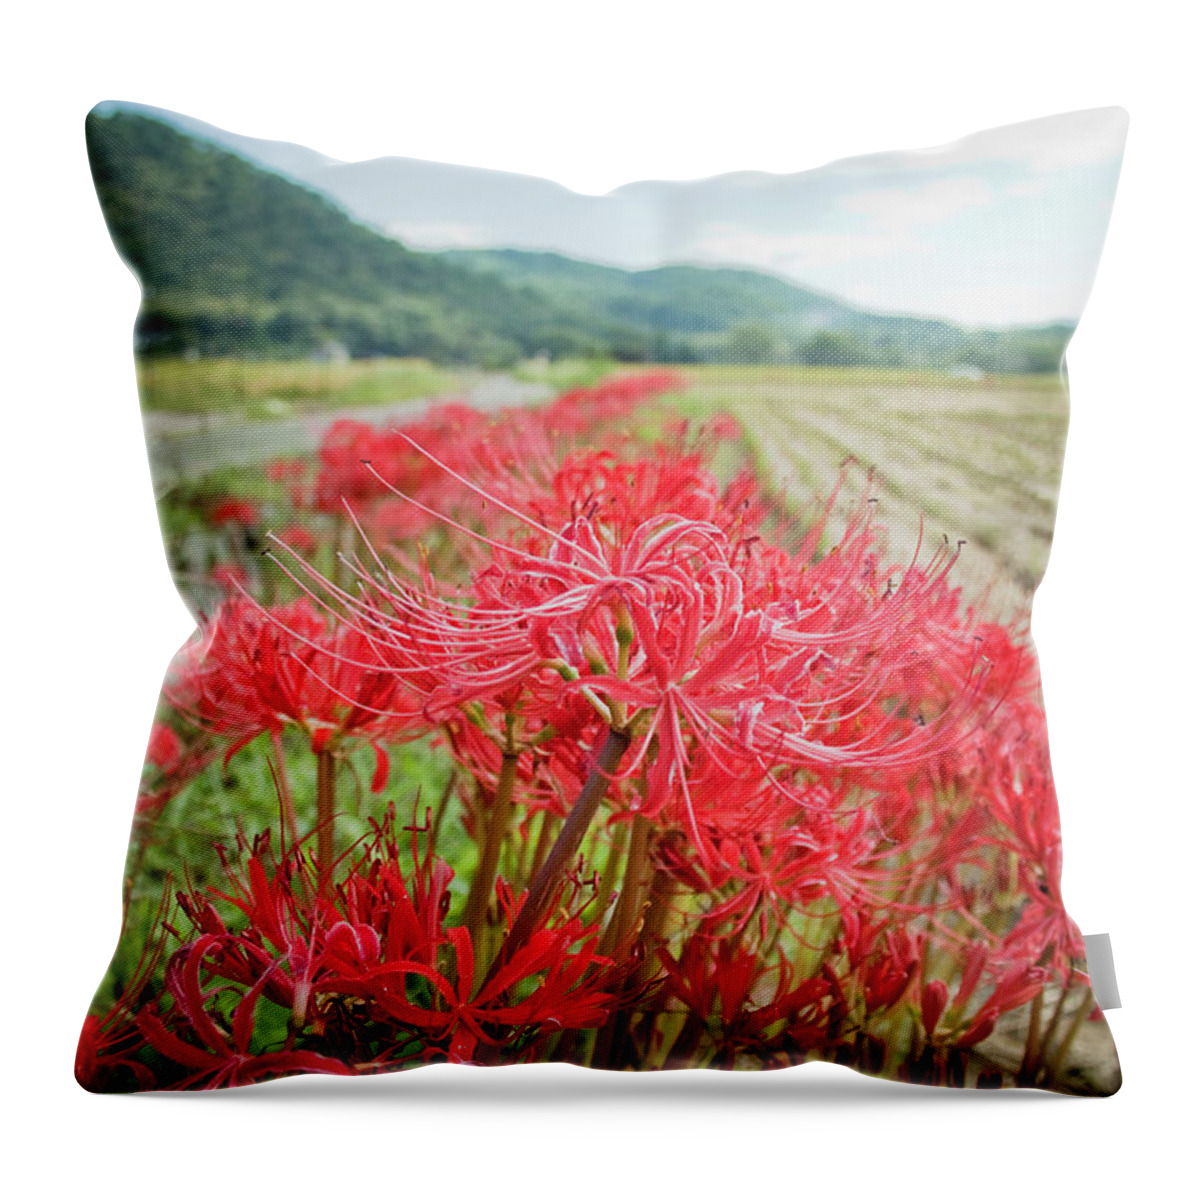 Spider Lily Throw Pillow featuring the photograph Spider Lily by Yoshika Sakai